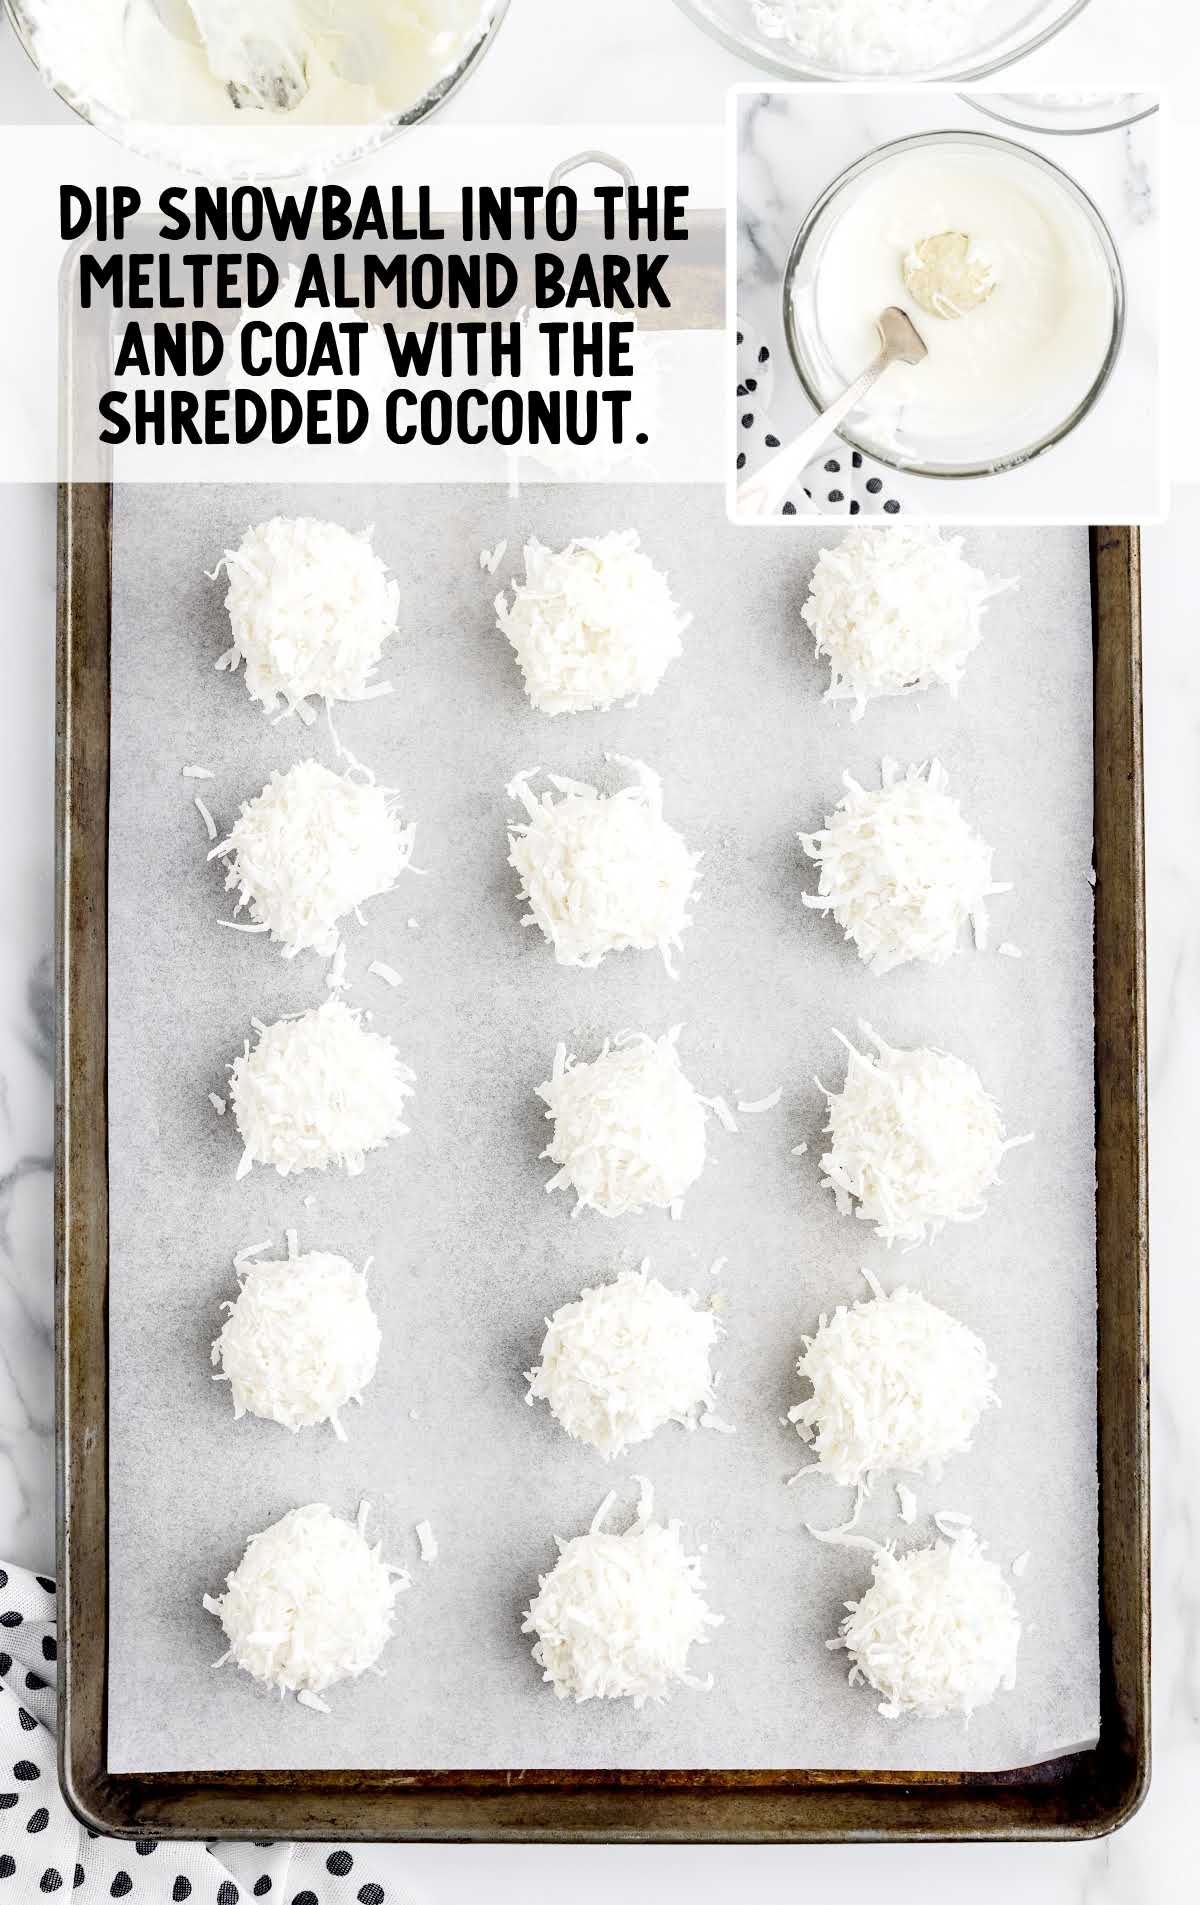 snowballs dipped into the melted almond bark and coated with the shredded coconut